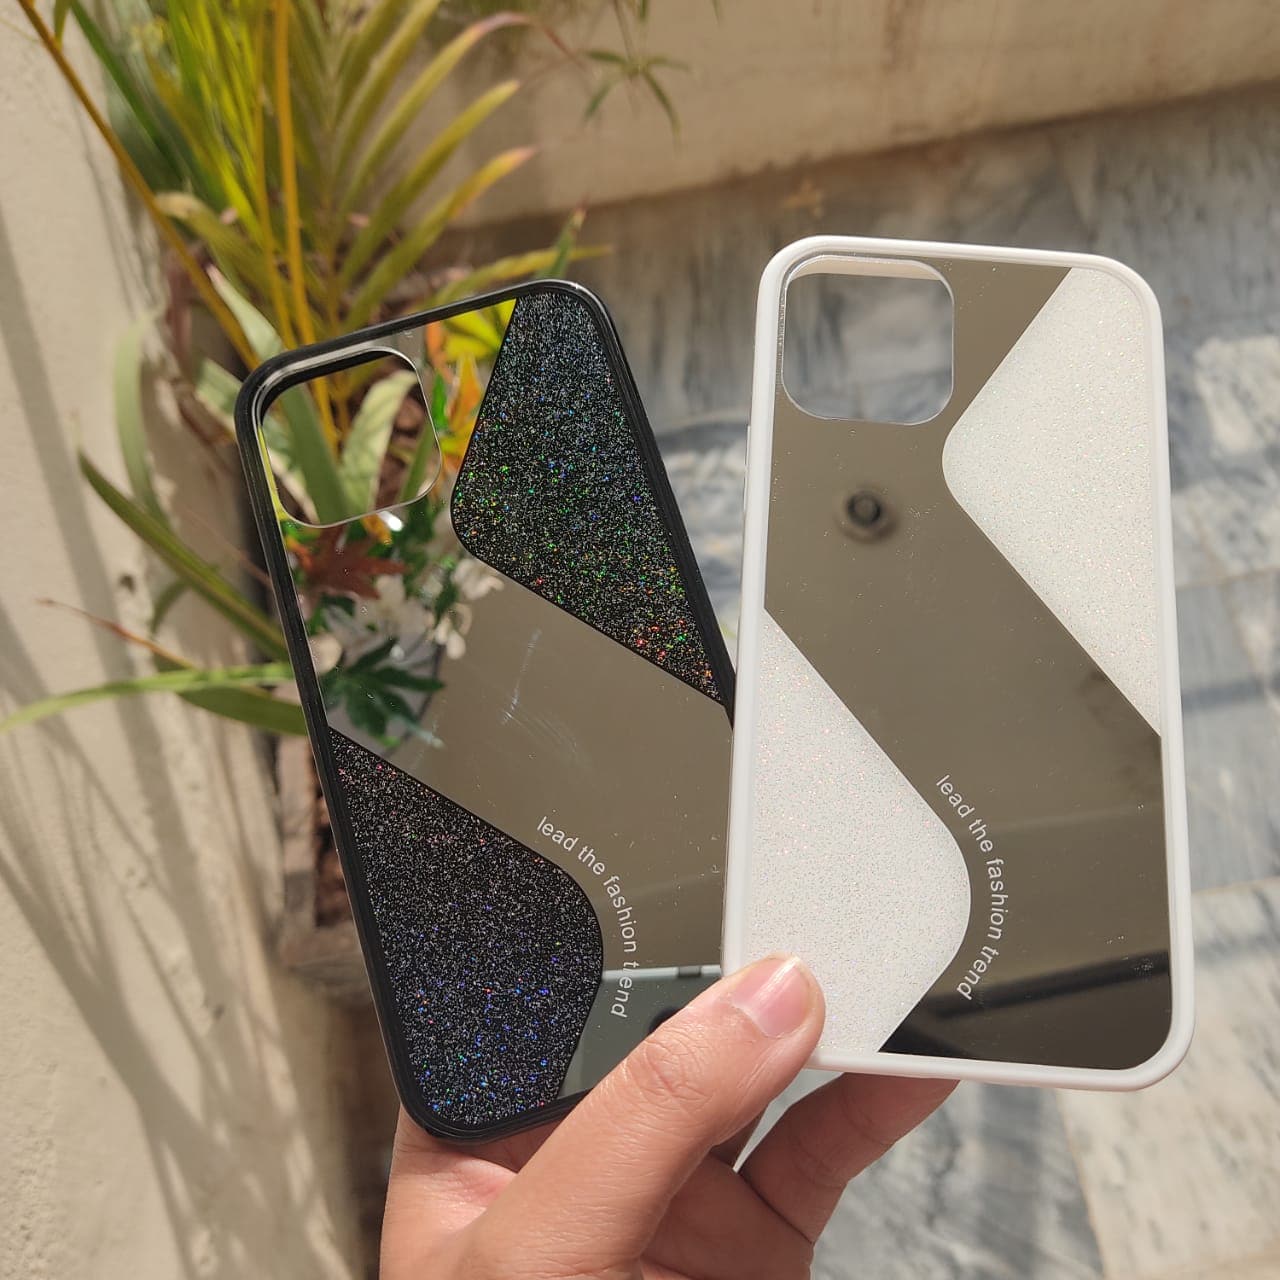 Fashion Glitter Mirror Glass Case For all iPhone Models